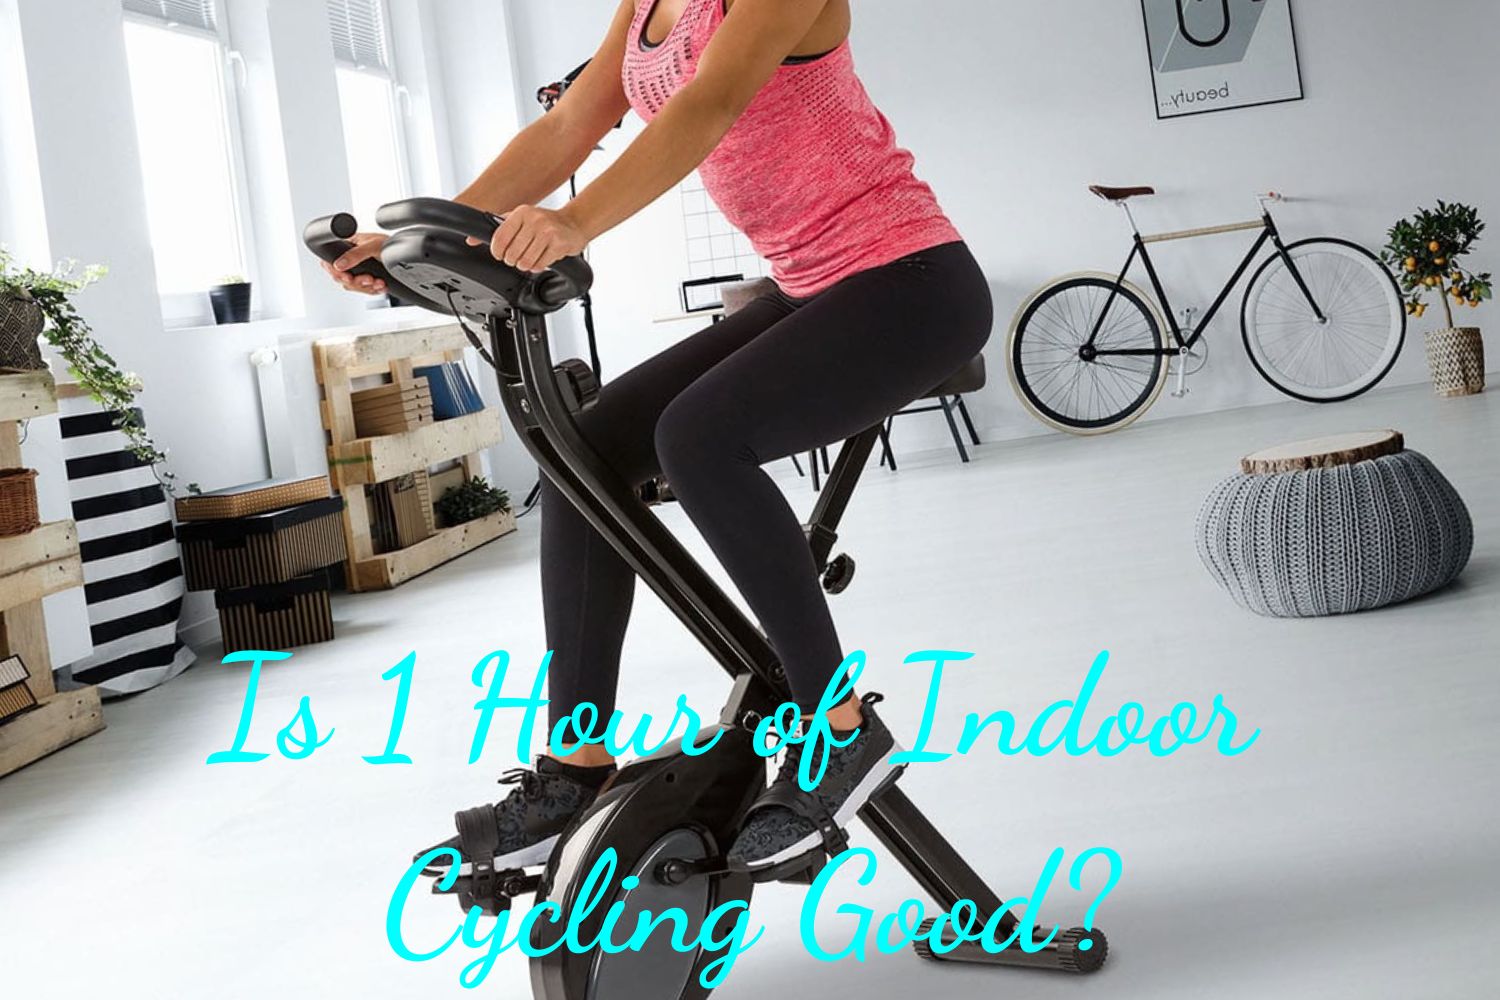 Is 1 Hour of Indoor Cycling Good?